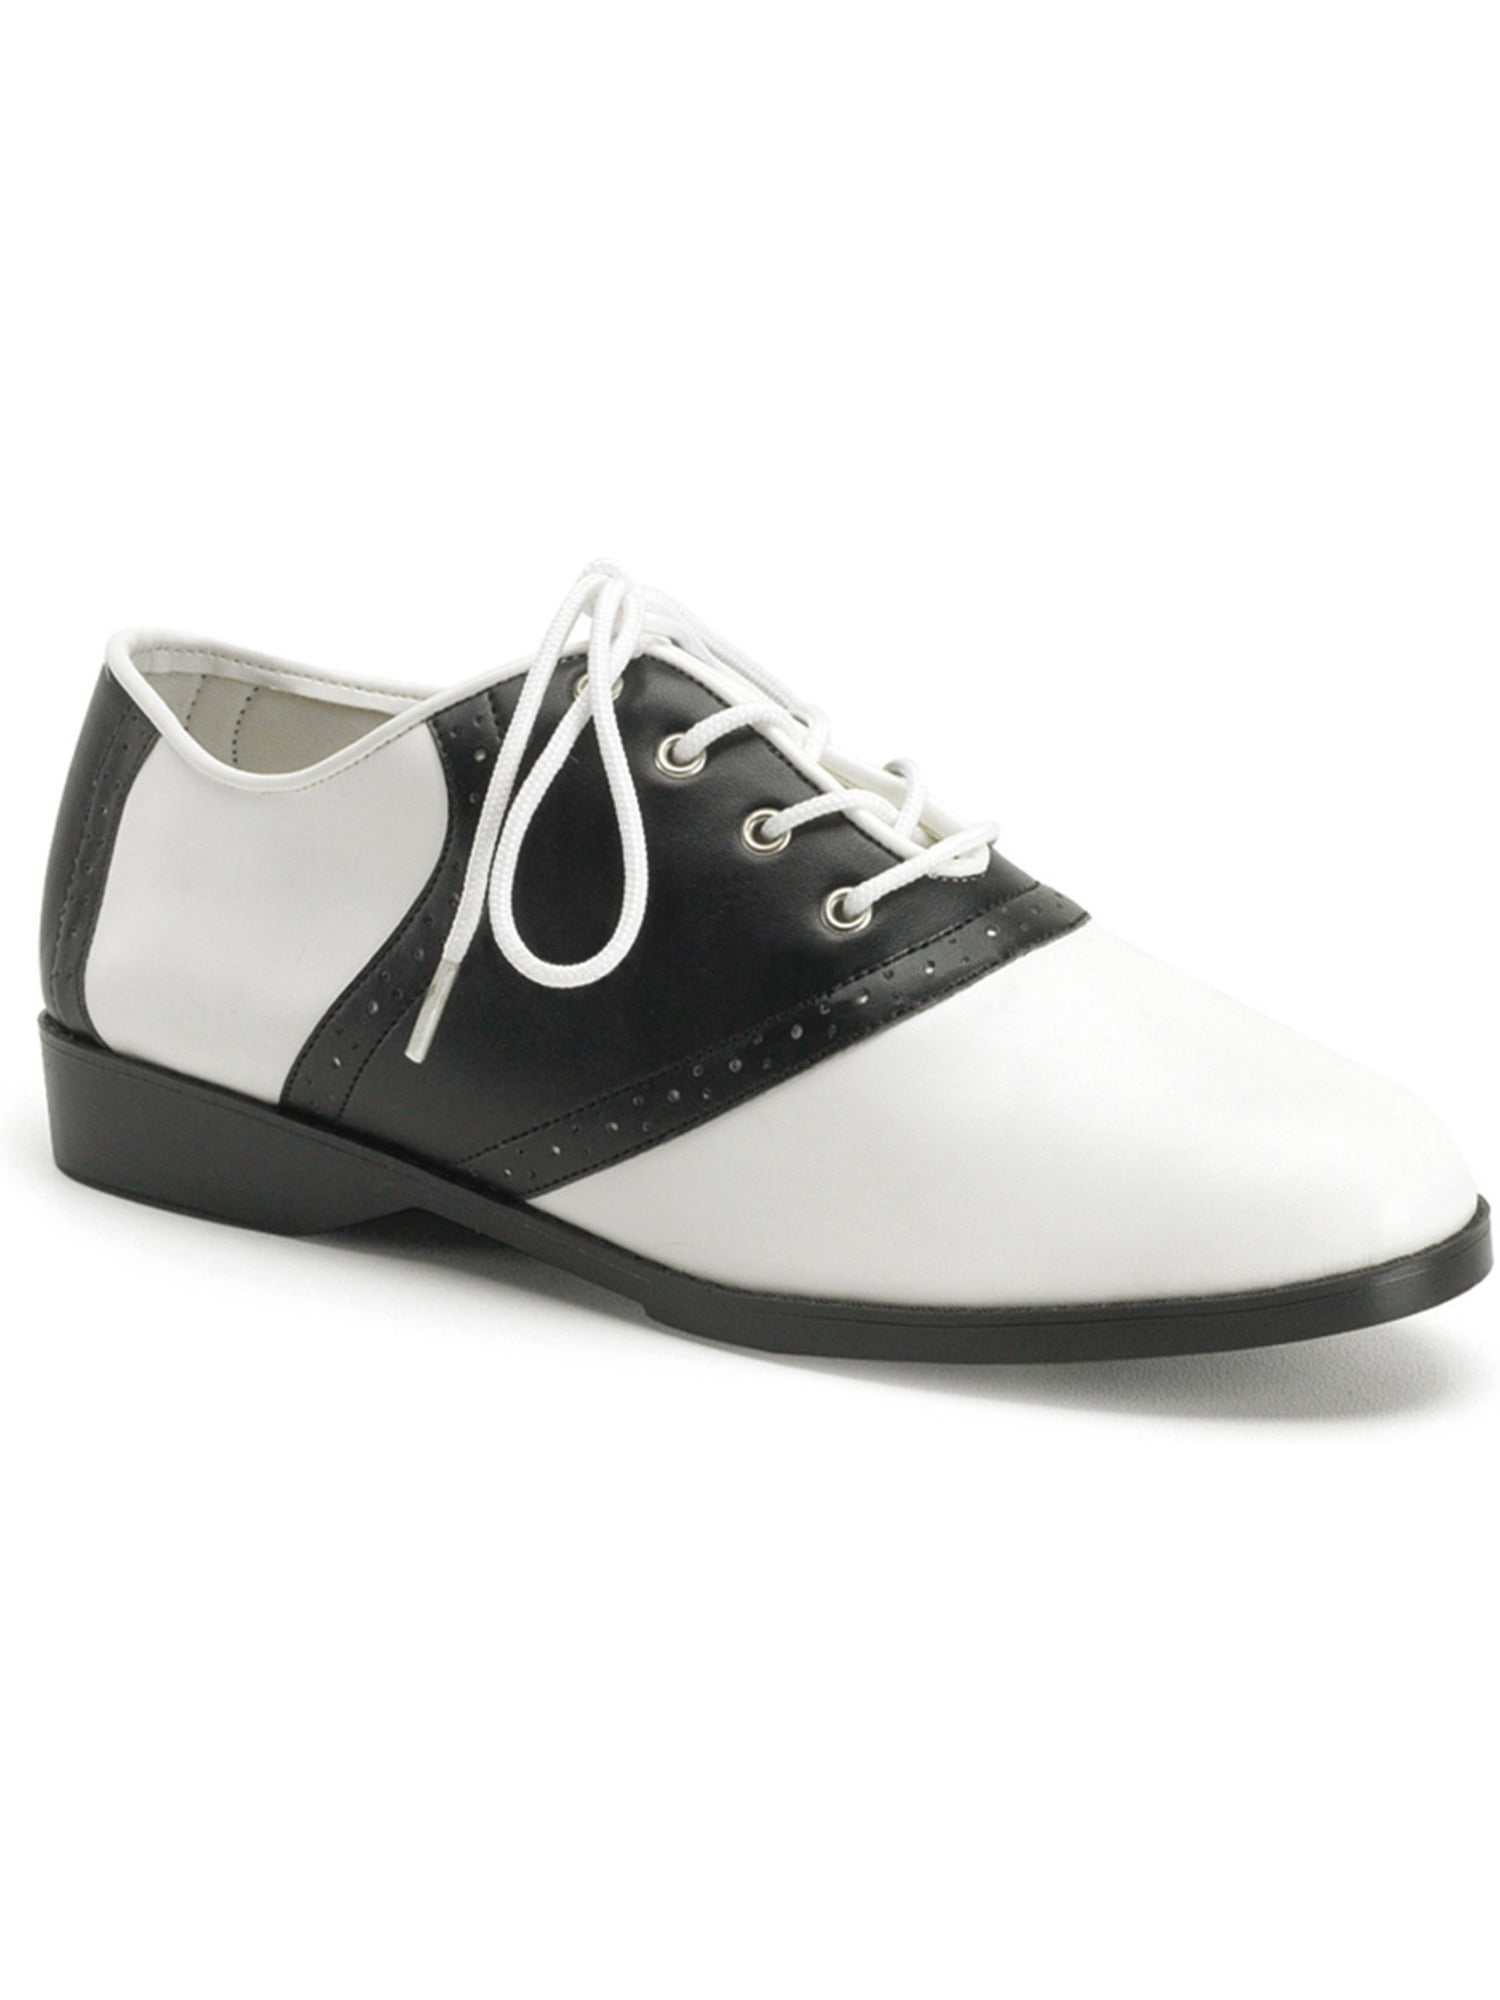 black and white flat shoes